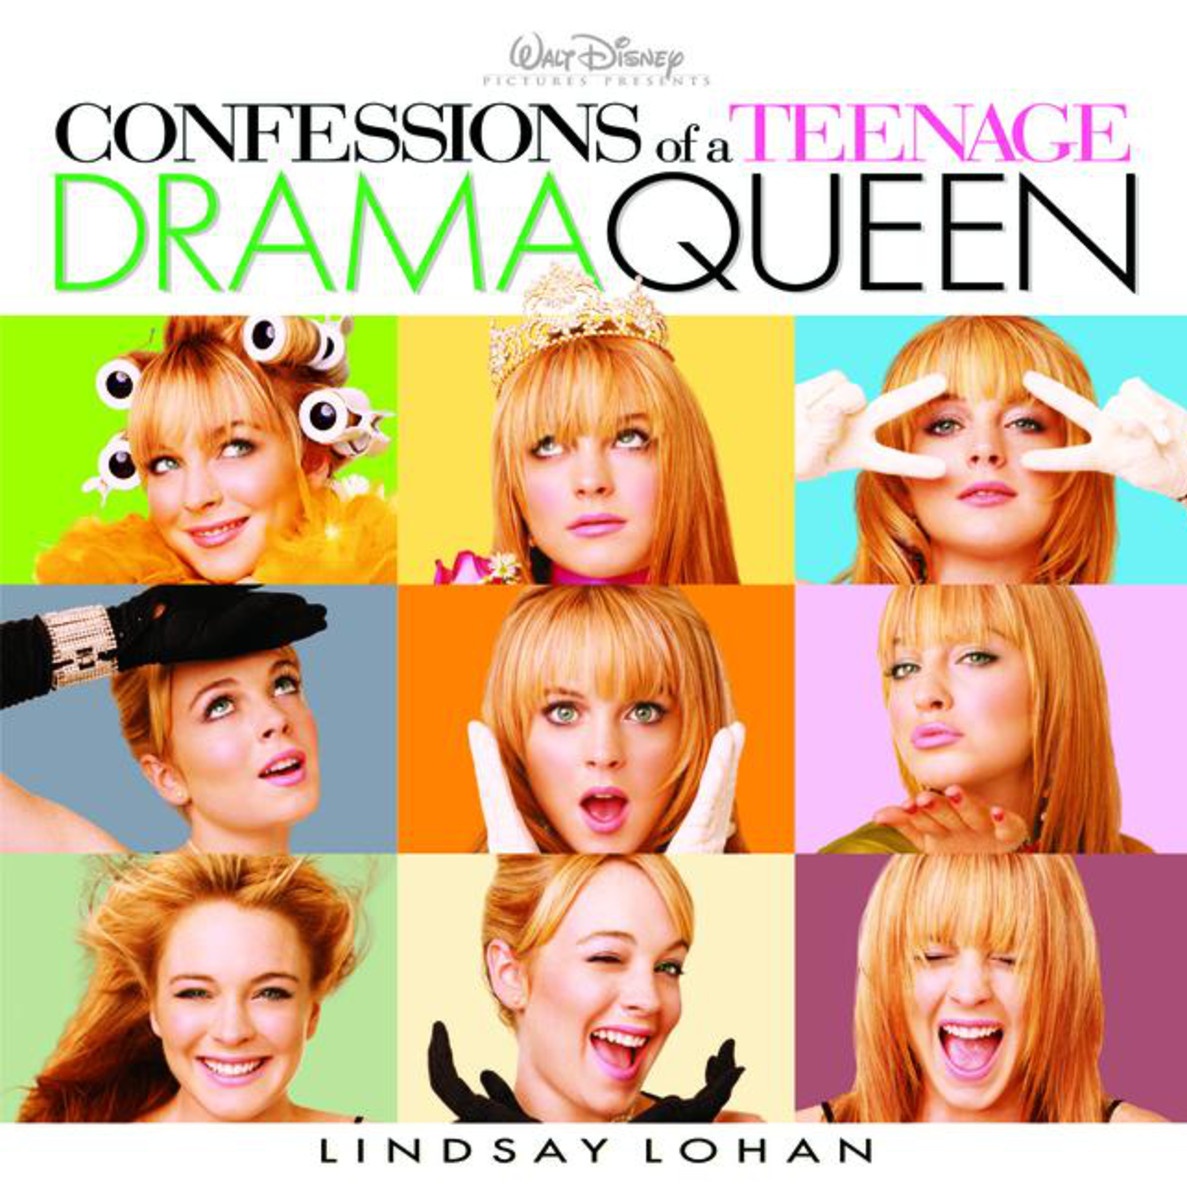 Confessions of a Teenage Drama Queen (Soundtrack from the Motion Picture)